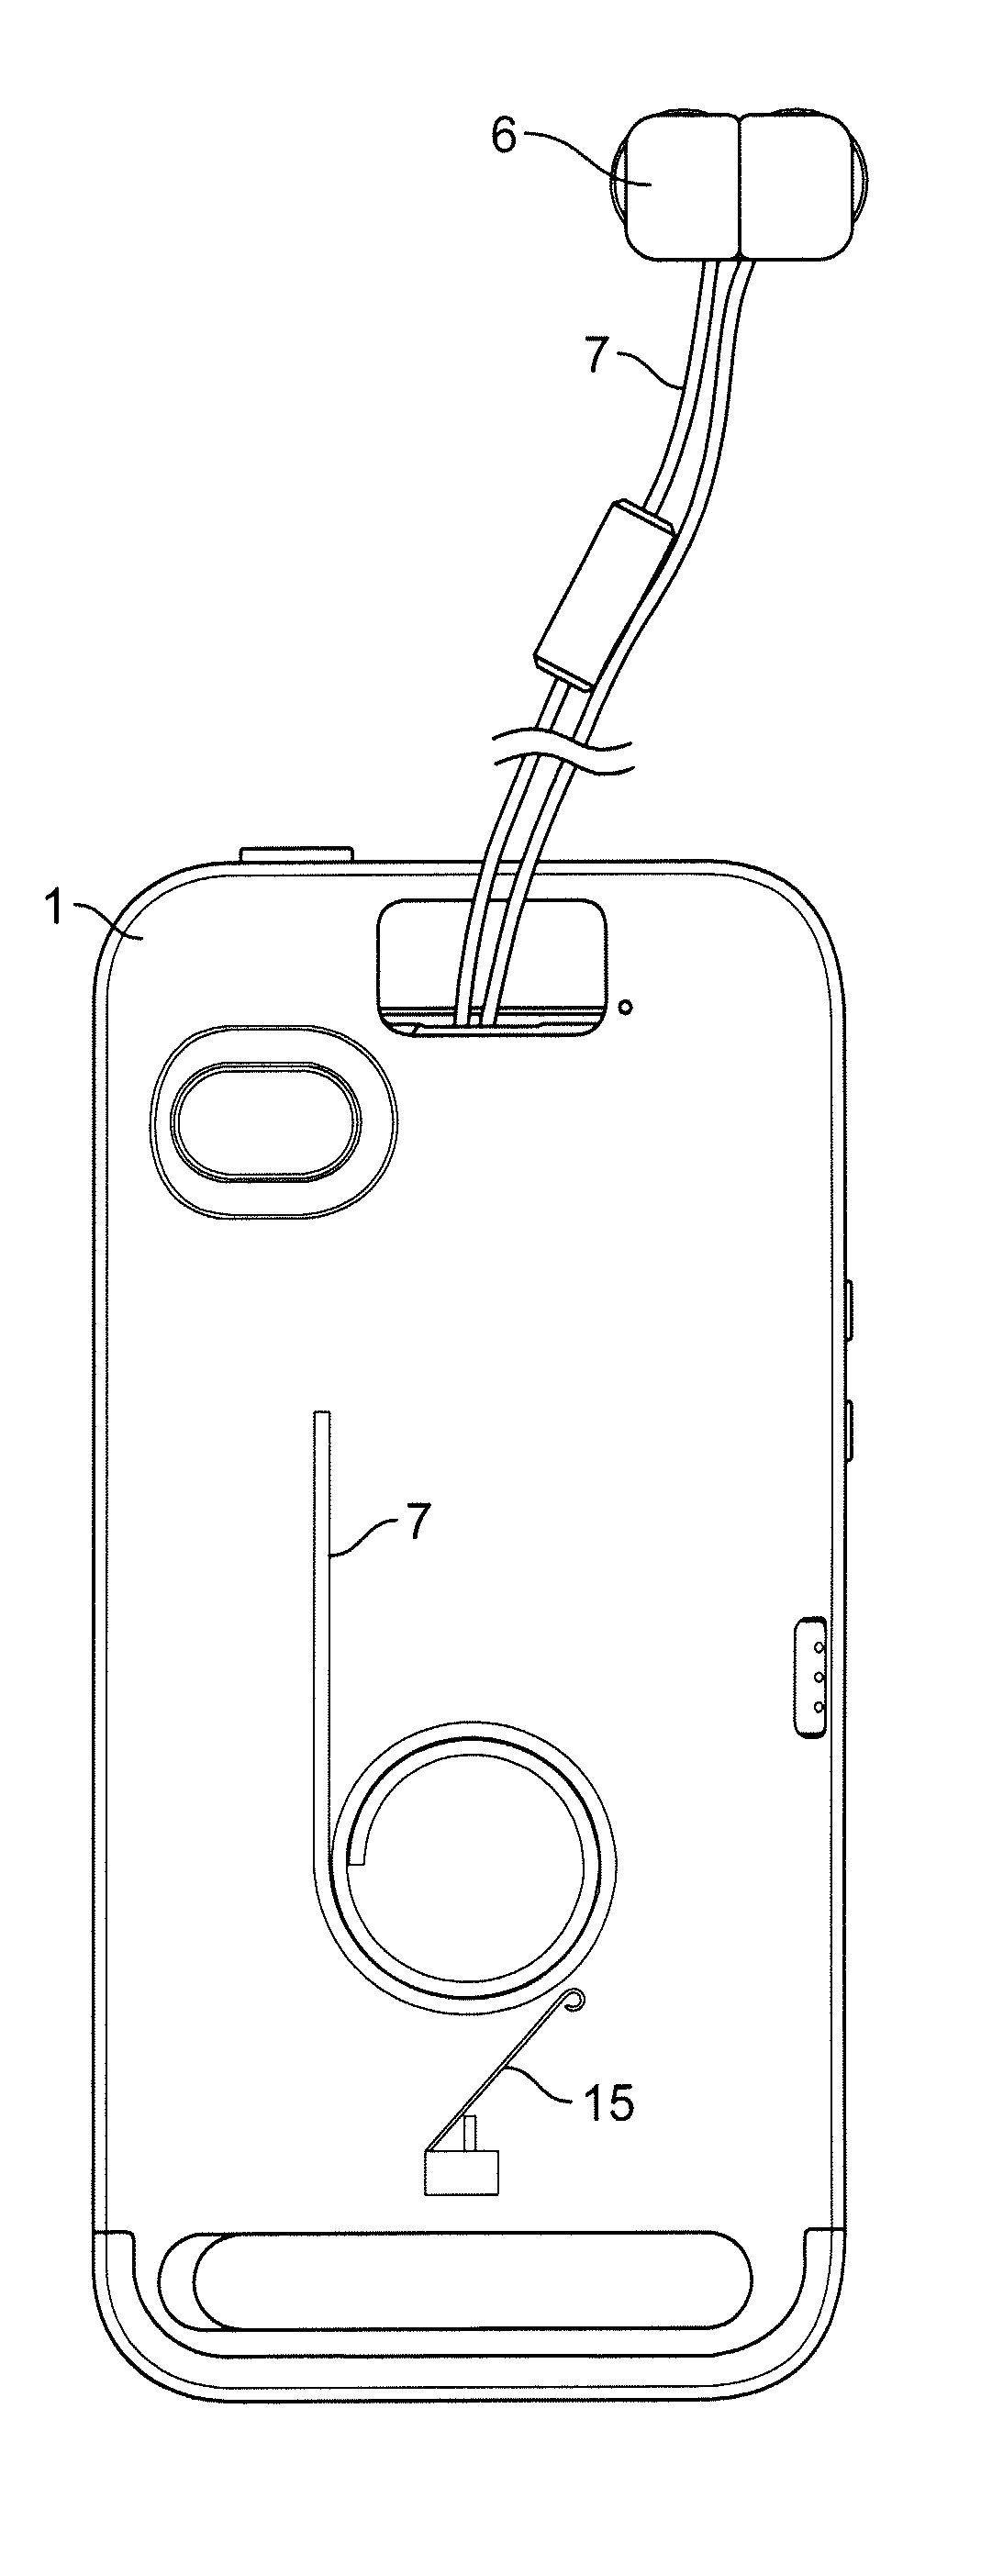 Health risk, mitigating, retractable, wired headset and protective case platform for wireless communication devices